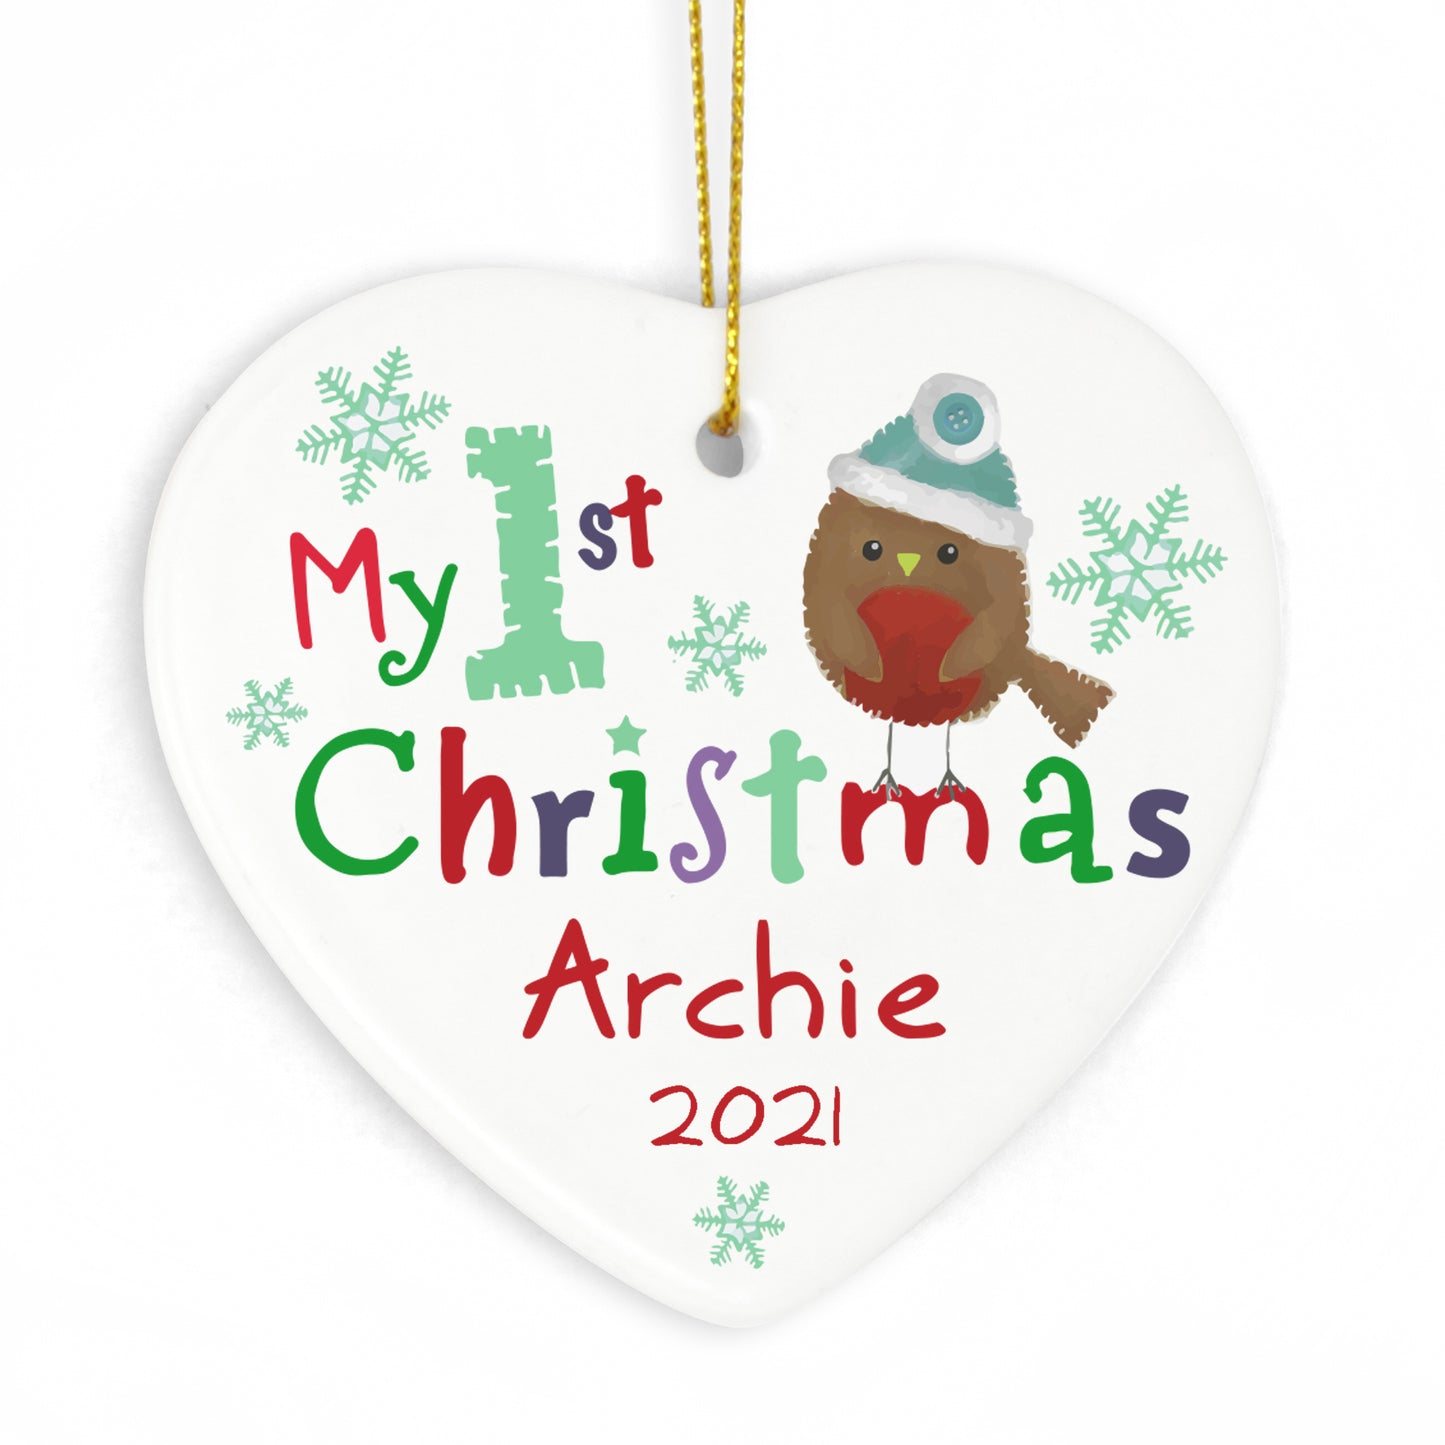 Personalised My 1st Christmas Ceramic Heart - Personalise It!